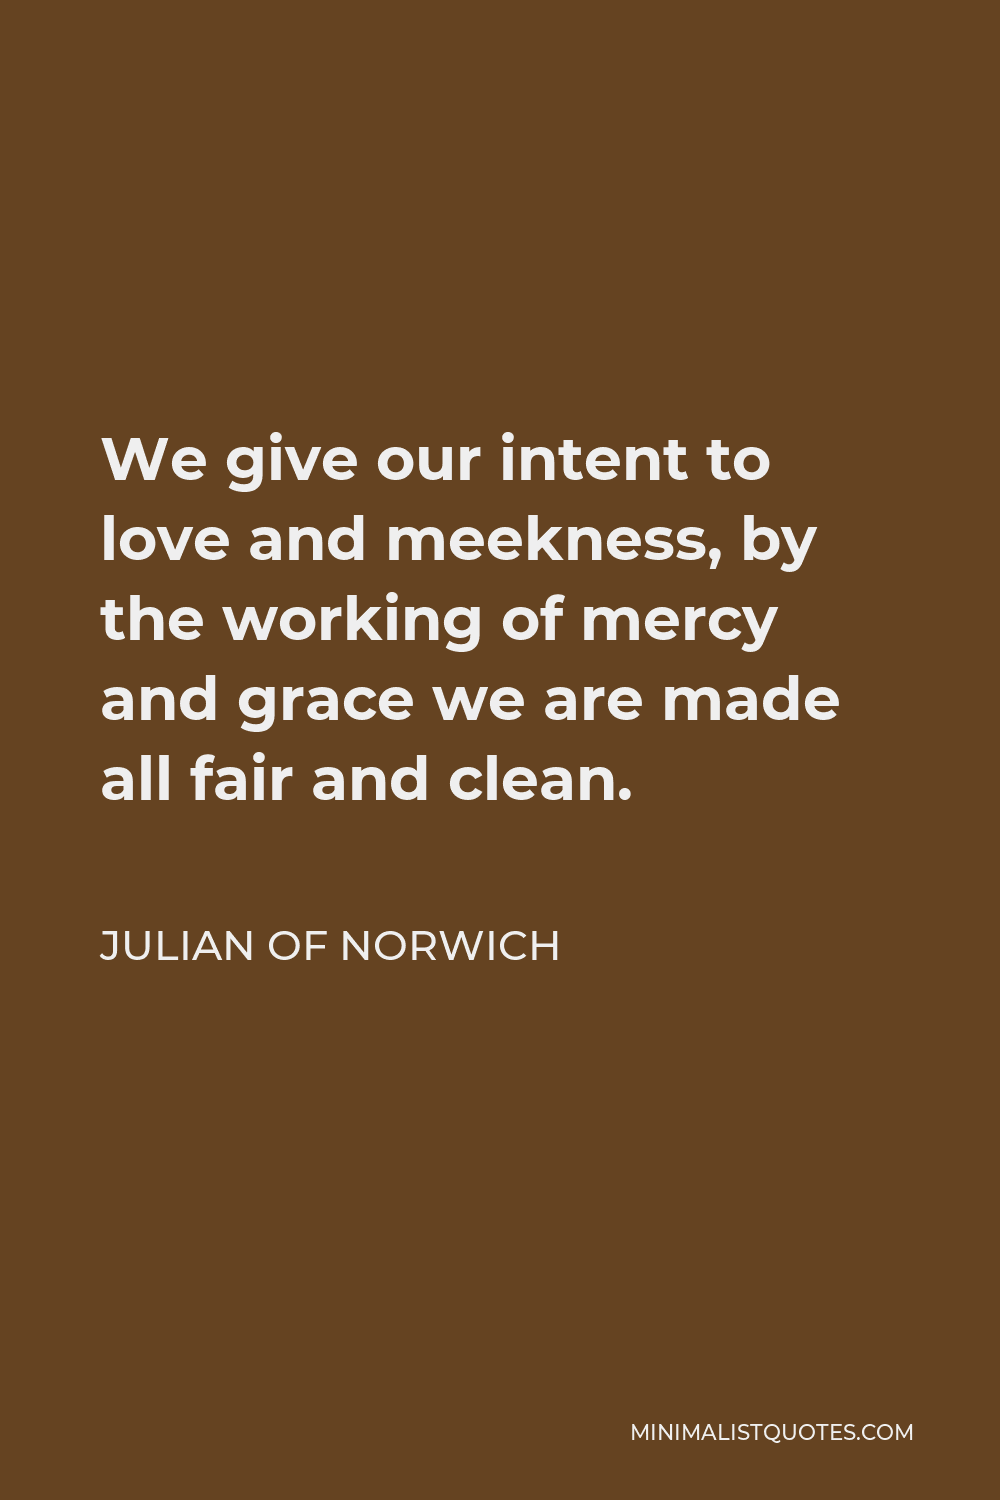 Julian of Norwich Quote - We give our intent to love and meekness, by the working of mercy and grace we are made all fair and clean.